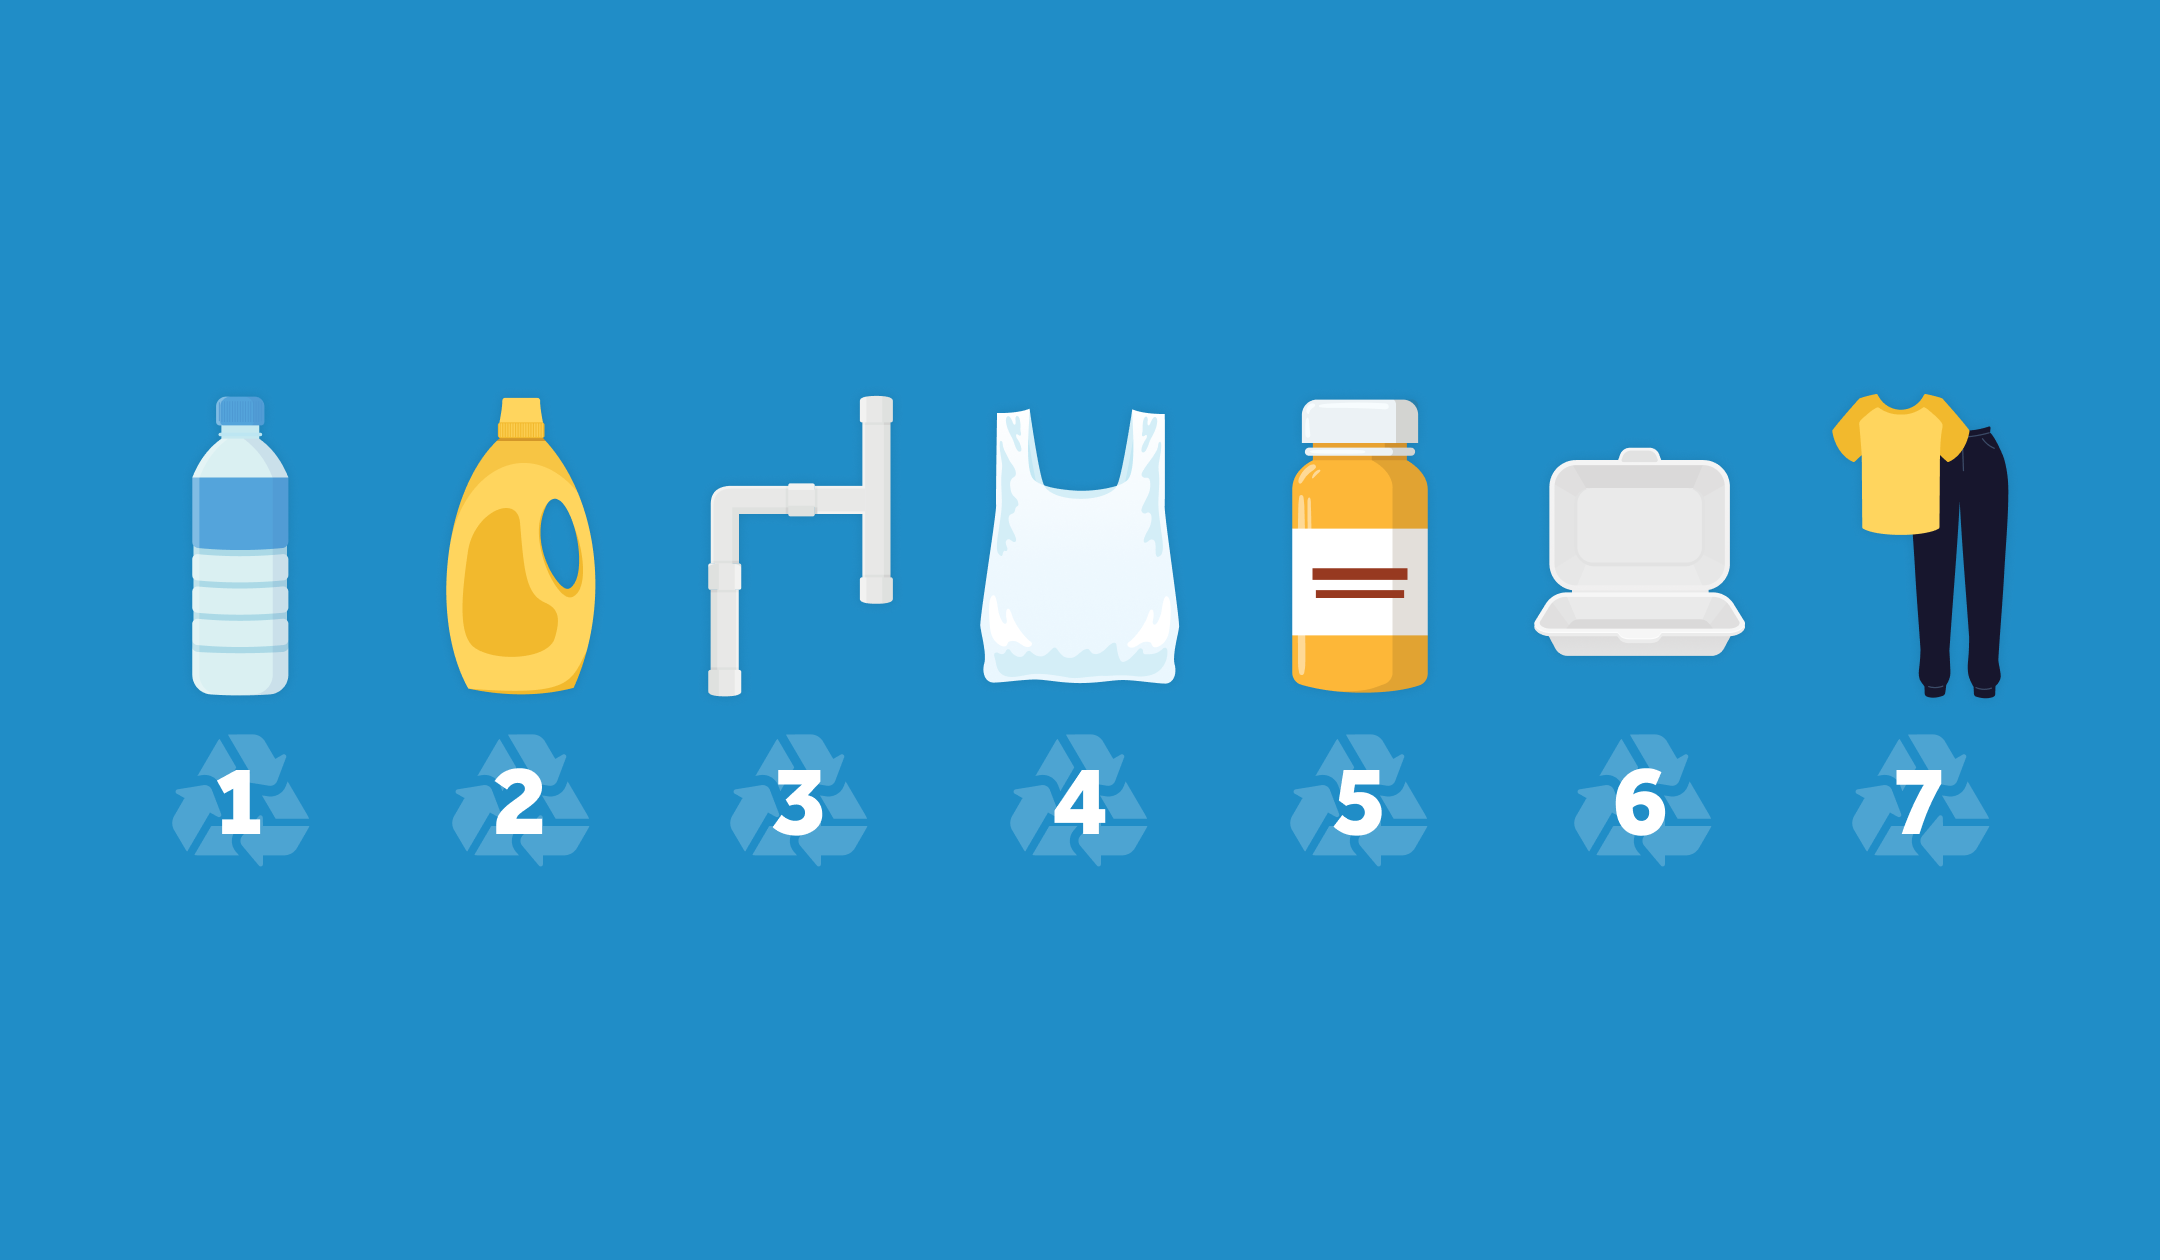 Illustration of most common uses for plastic types 1 through 7